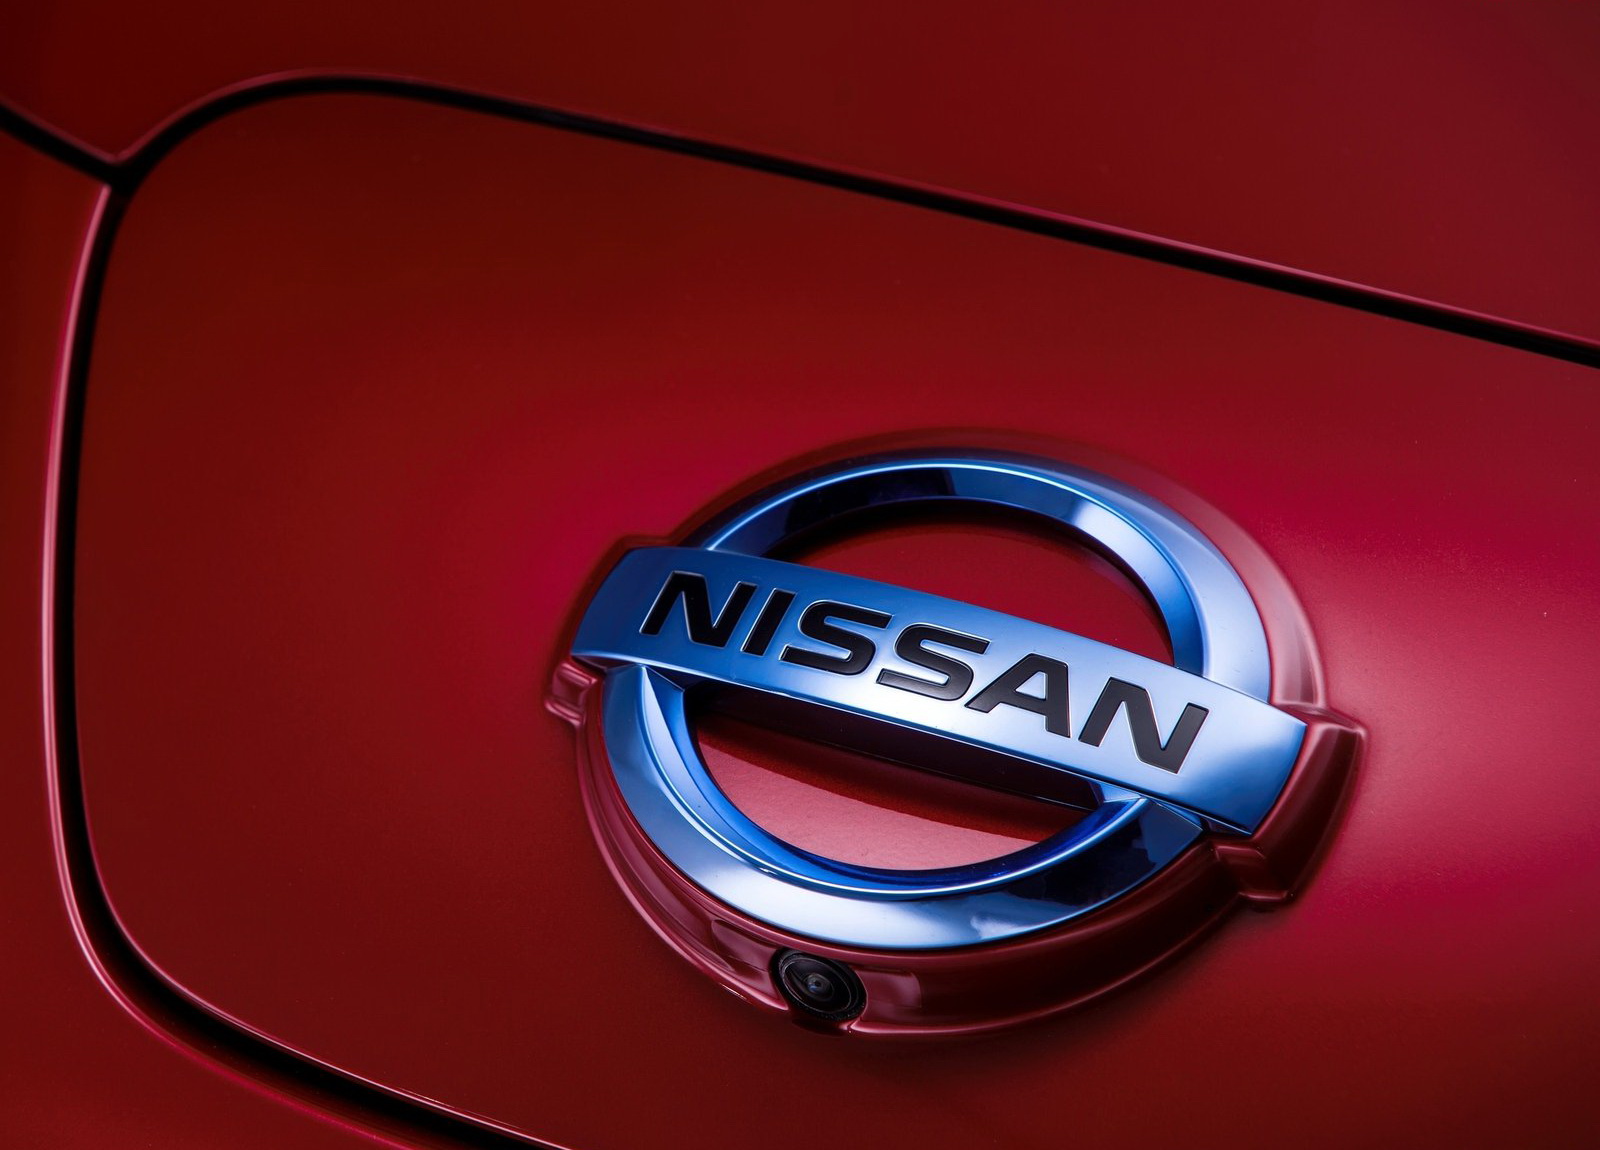 Nissan Is Recalling Nearly 400,000 Vehicles Over Potential Fire Hazard